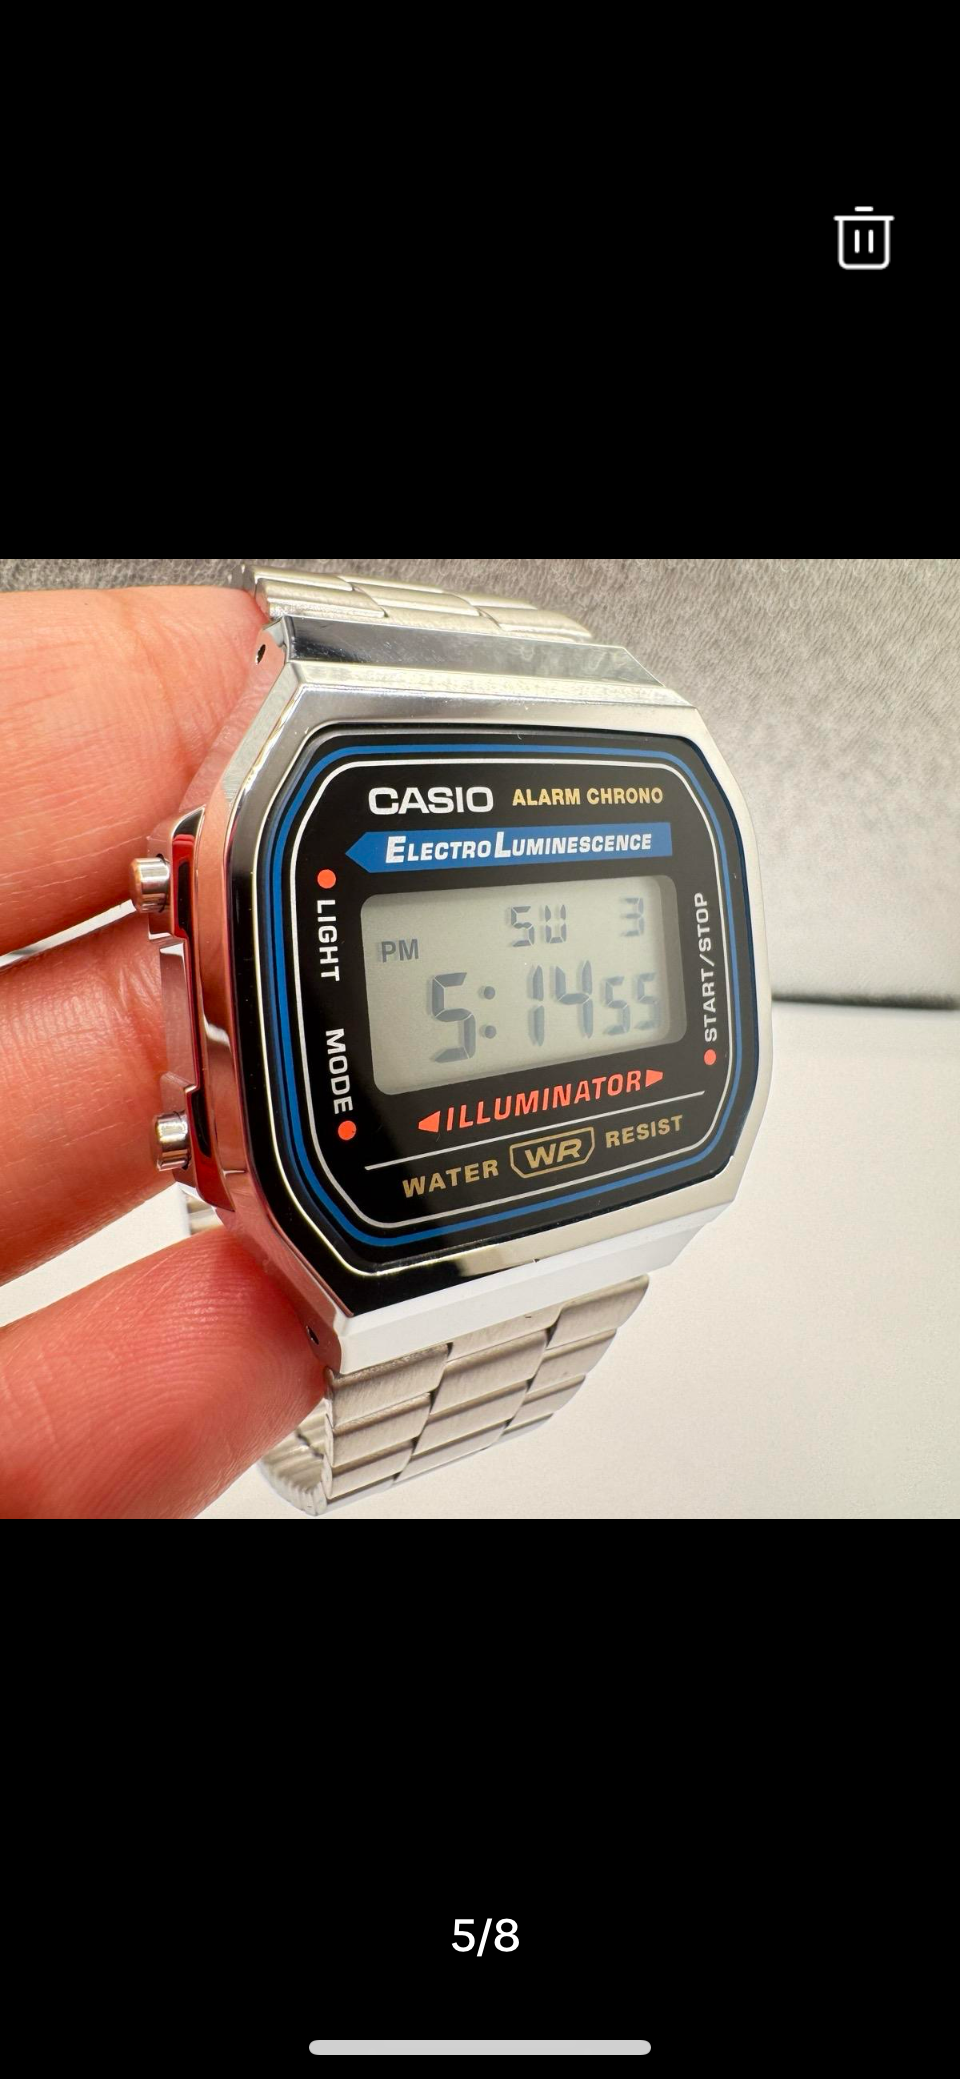 Casio Unisex Wrist Watch , Wide 35mm Diameter , Brand New Item, Stainless Steel , Lightweight ,  Digital Movement , Brand New Item, Fits Up To 8 inches Long. Package in a Lightweight Envelope From New Jersey .